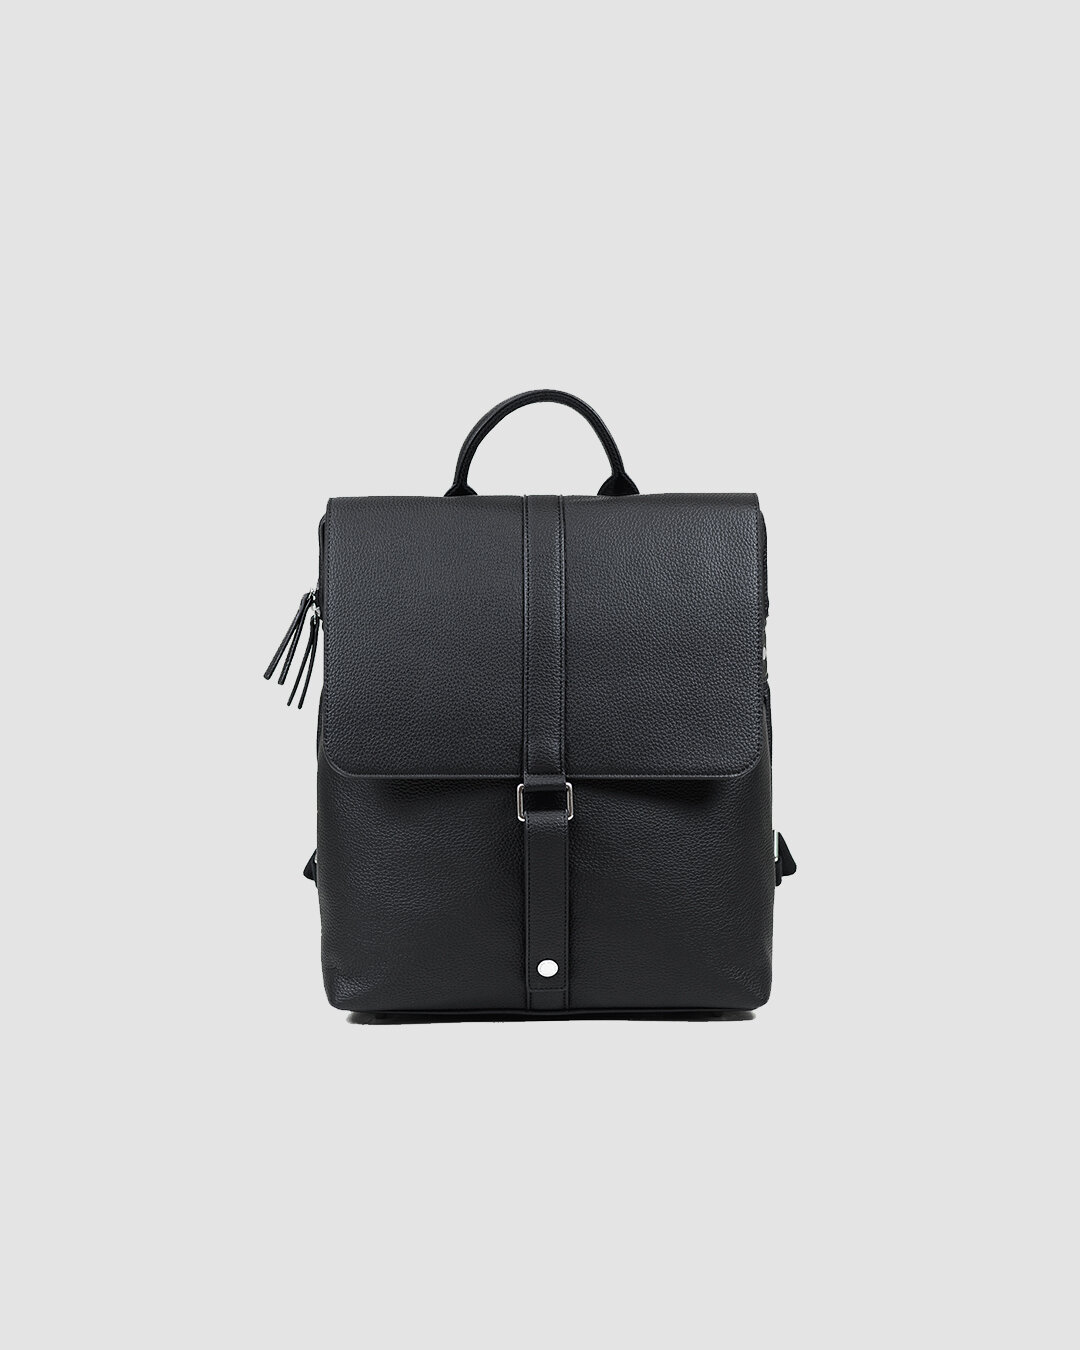 ellectric — City backpack by Weather Goods